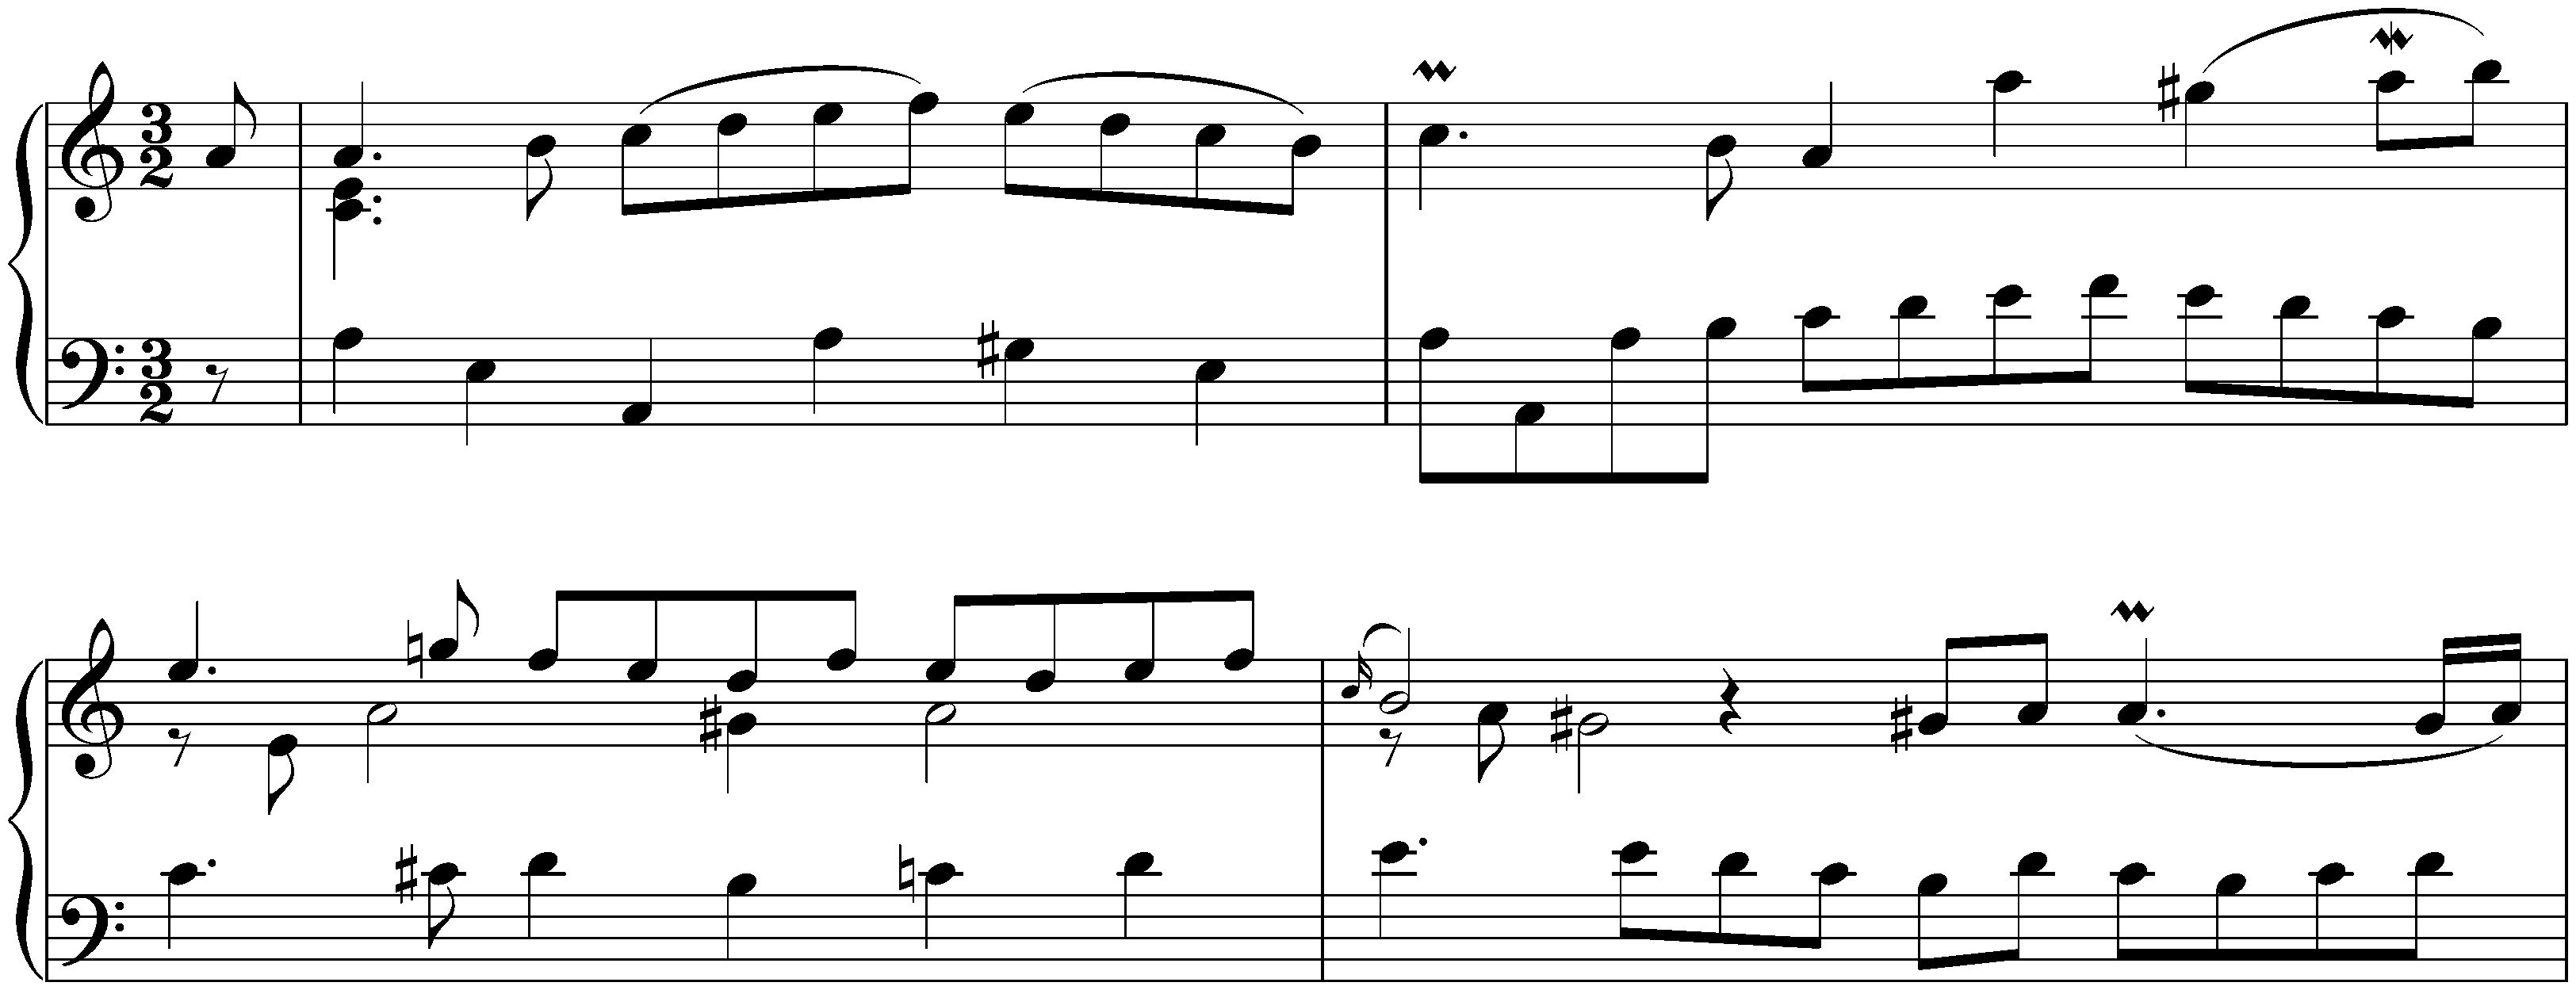 English Suite no. 2 in A minor, BWV 807; 3. Courante